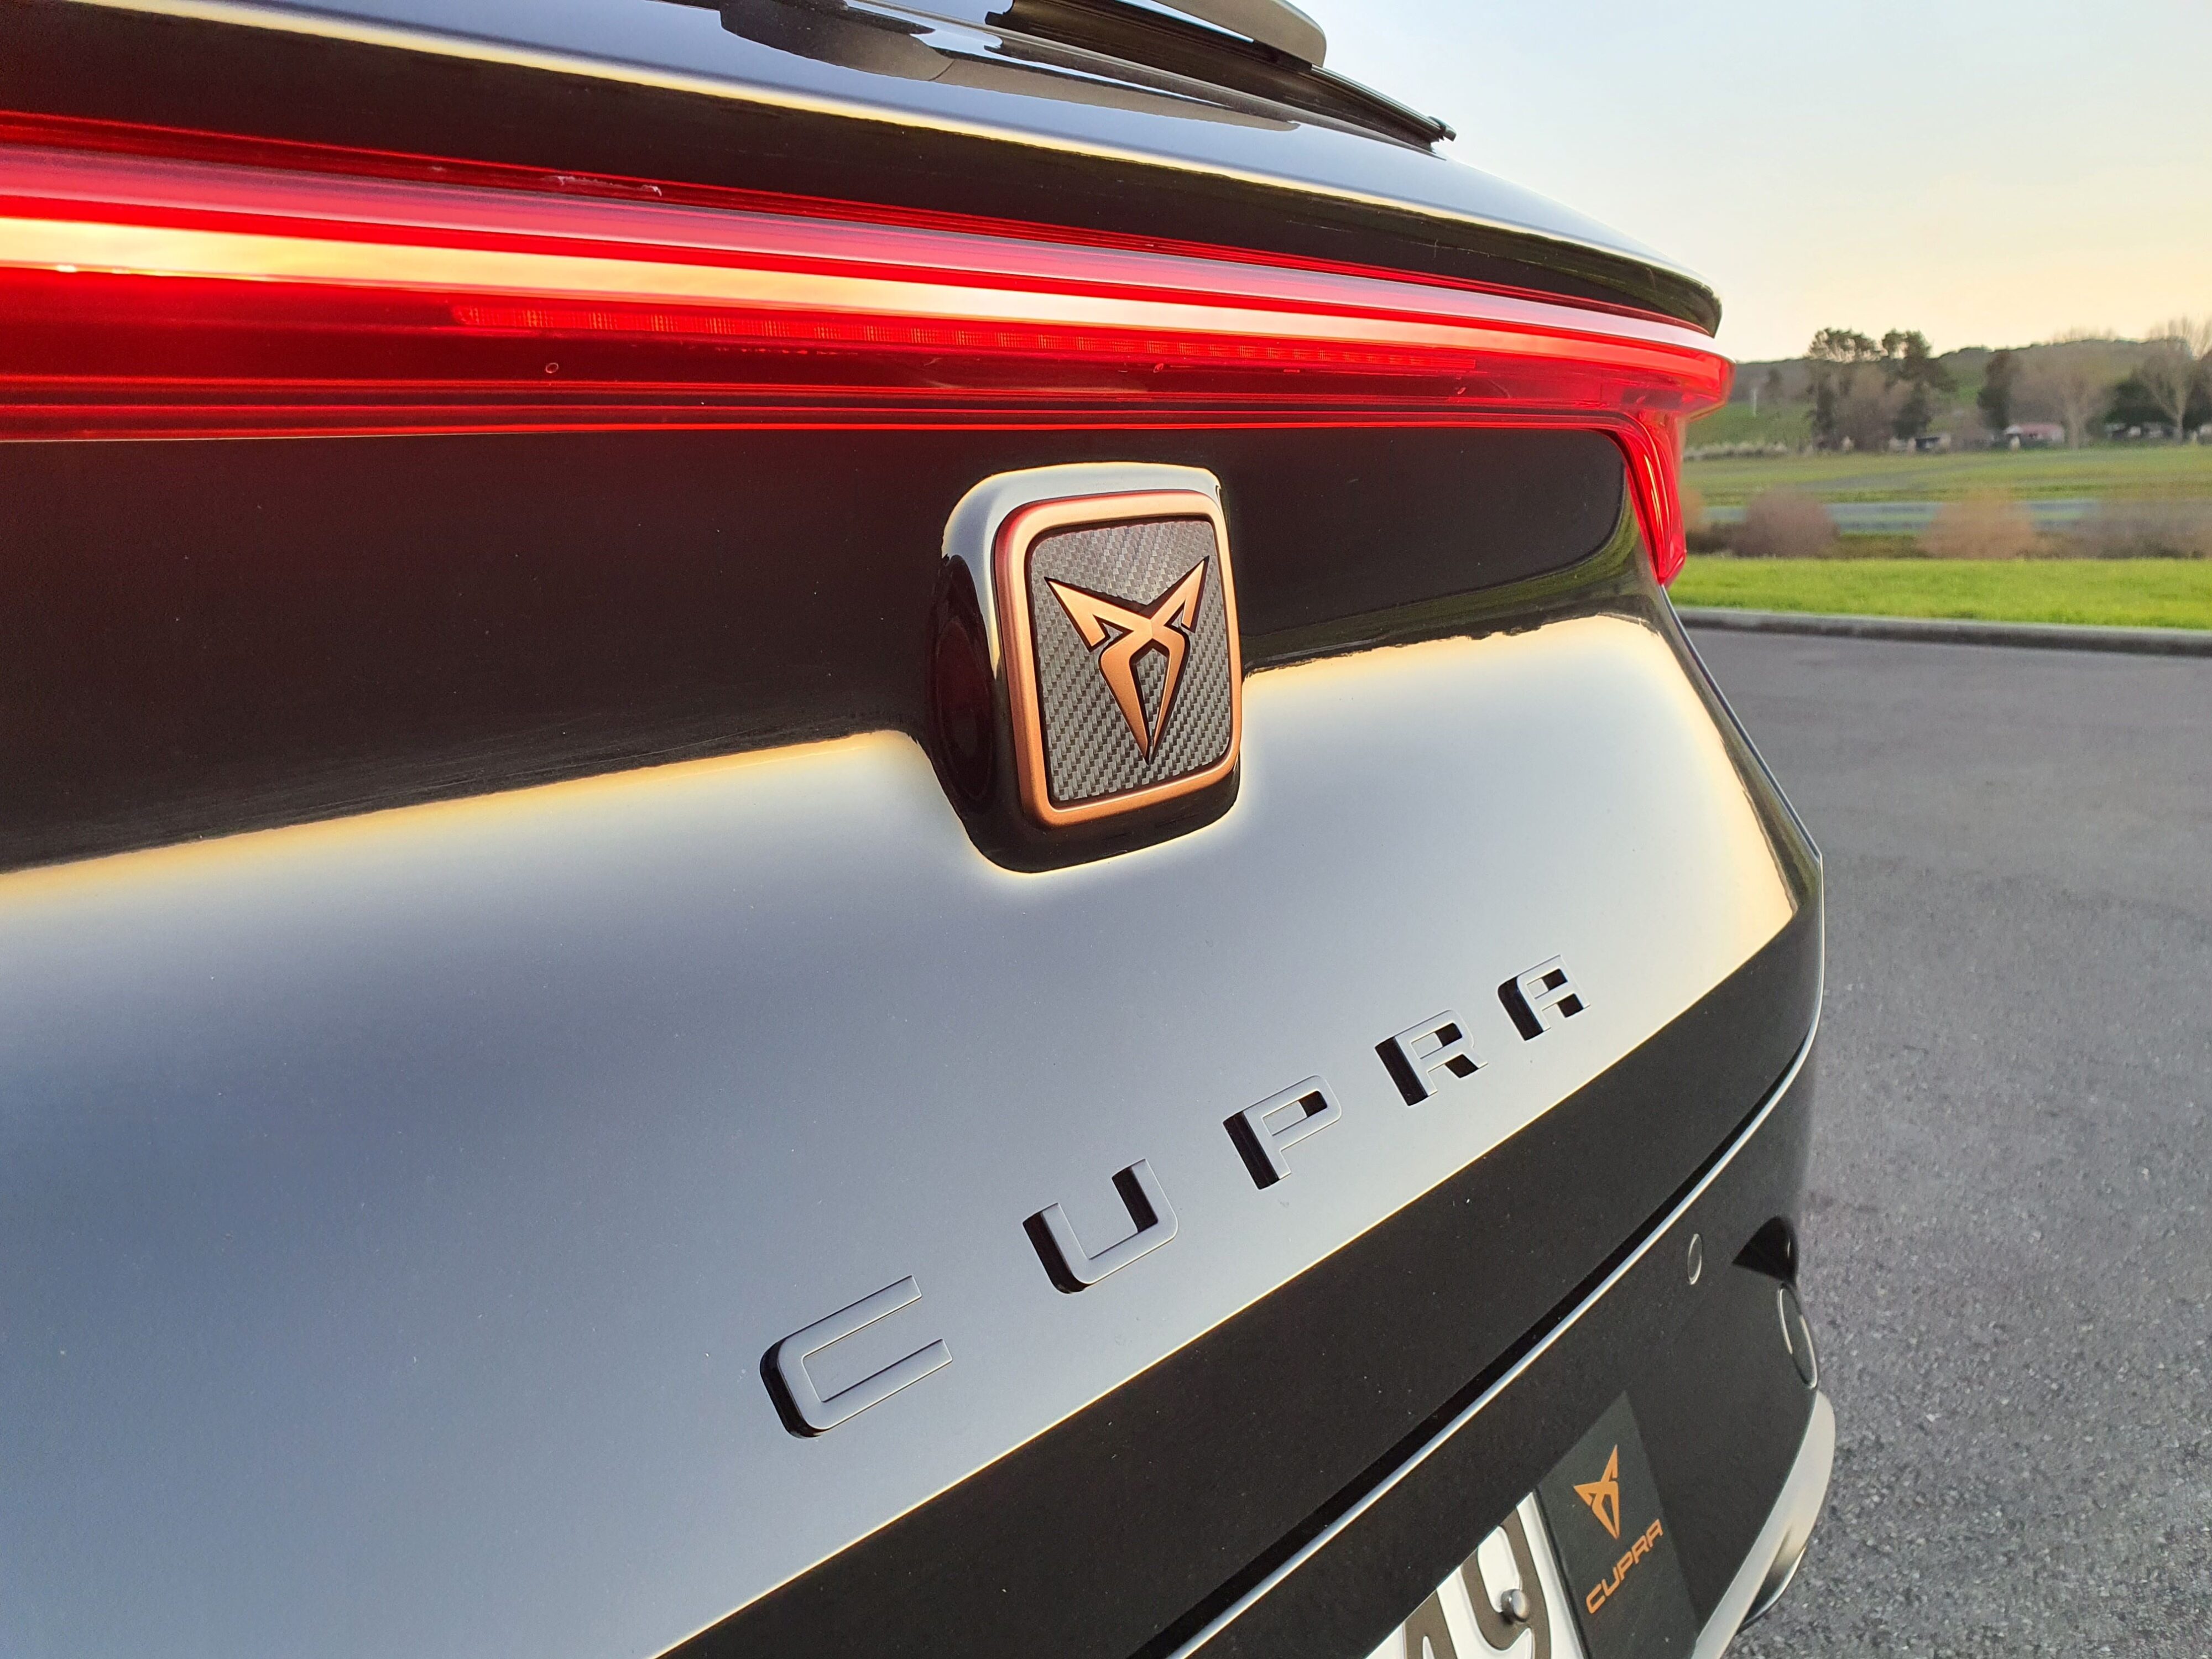 Photograph of a Cupra badge on the rear of a 2023 Cupra Leon V Sports Tourer in black.